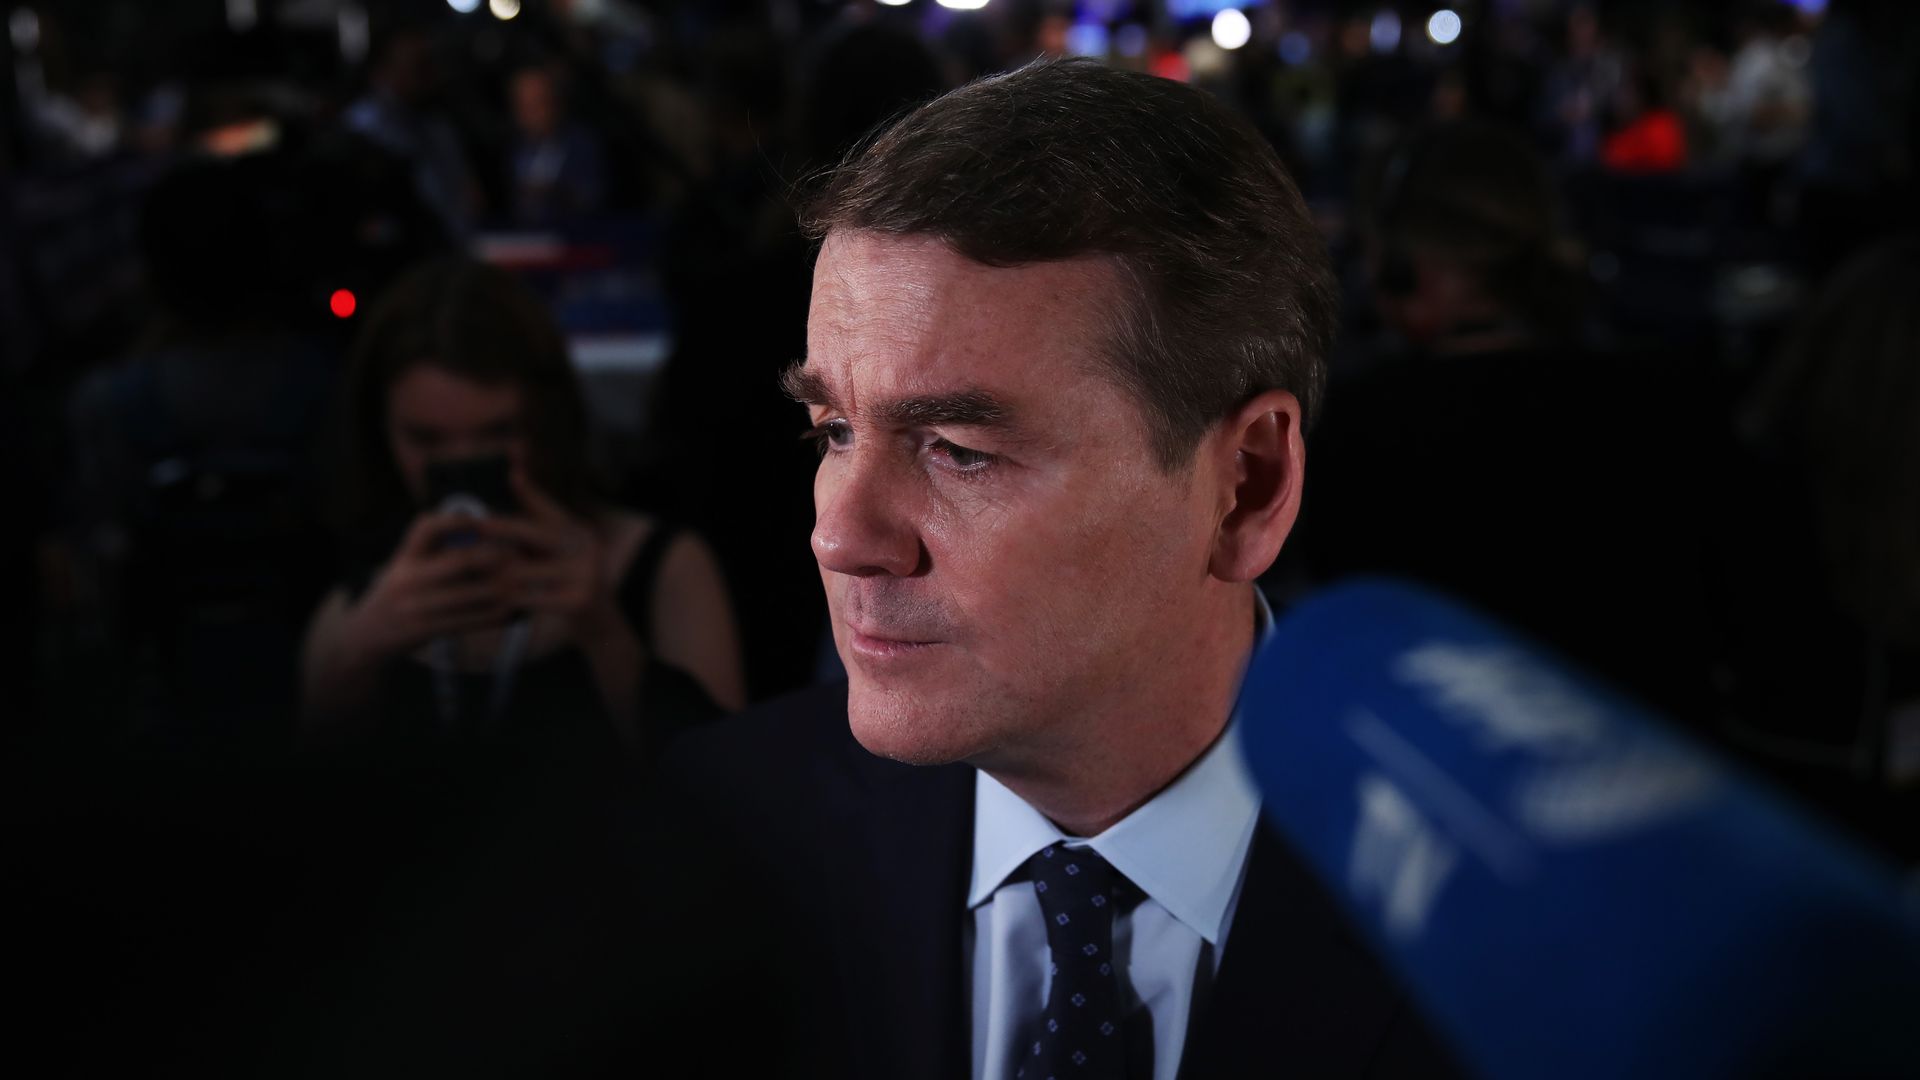 Sen. Michael Bennet (D-Col.) following the first round of 2020 Democratic primary debates.